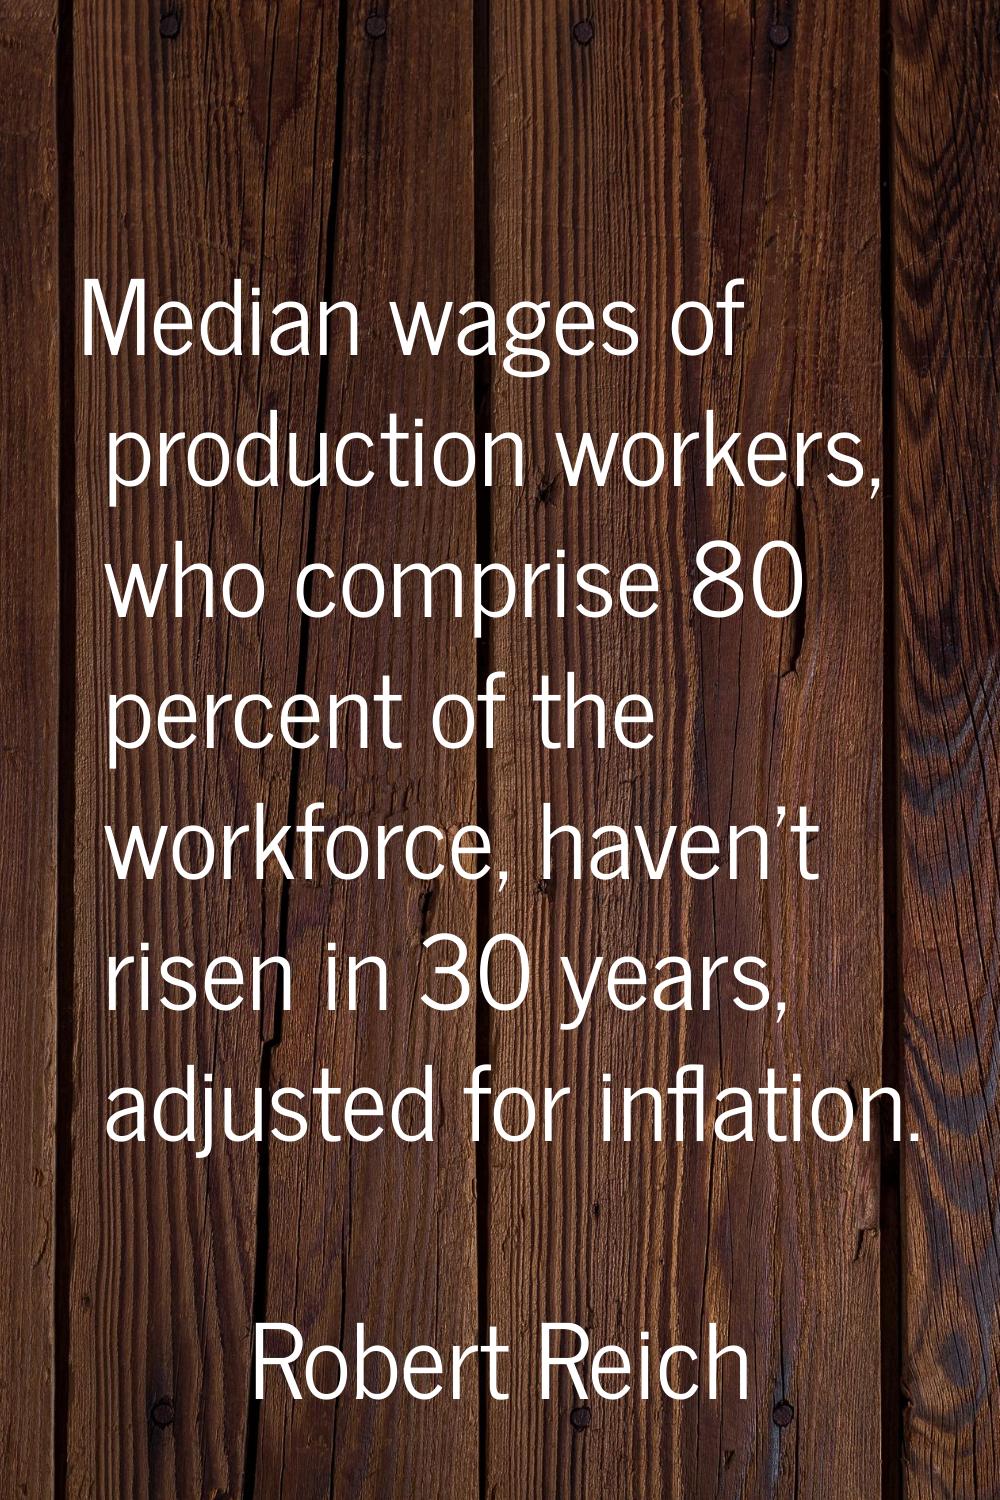 Median wages of production workers, who comprise 80 percent of the workforce, haven't risen in 30 y